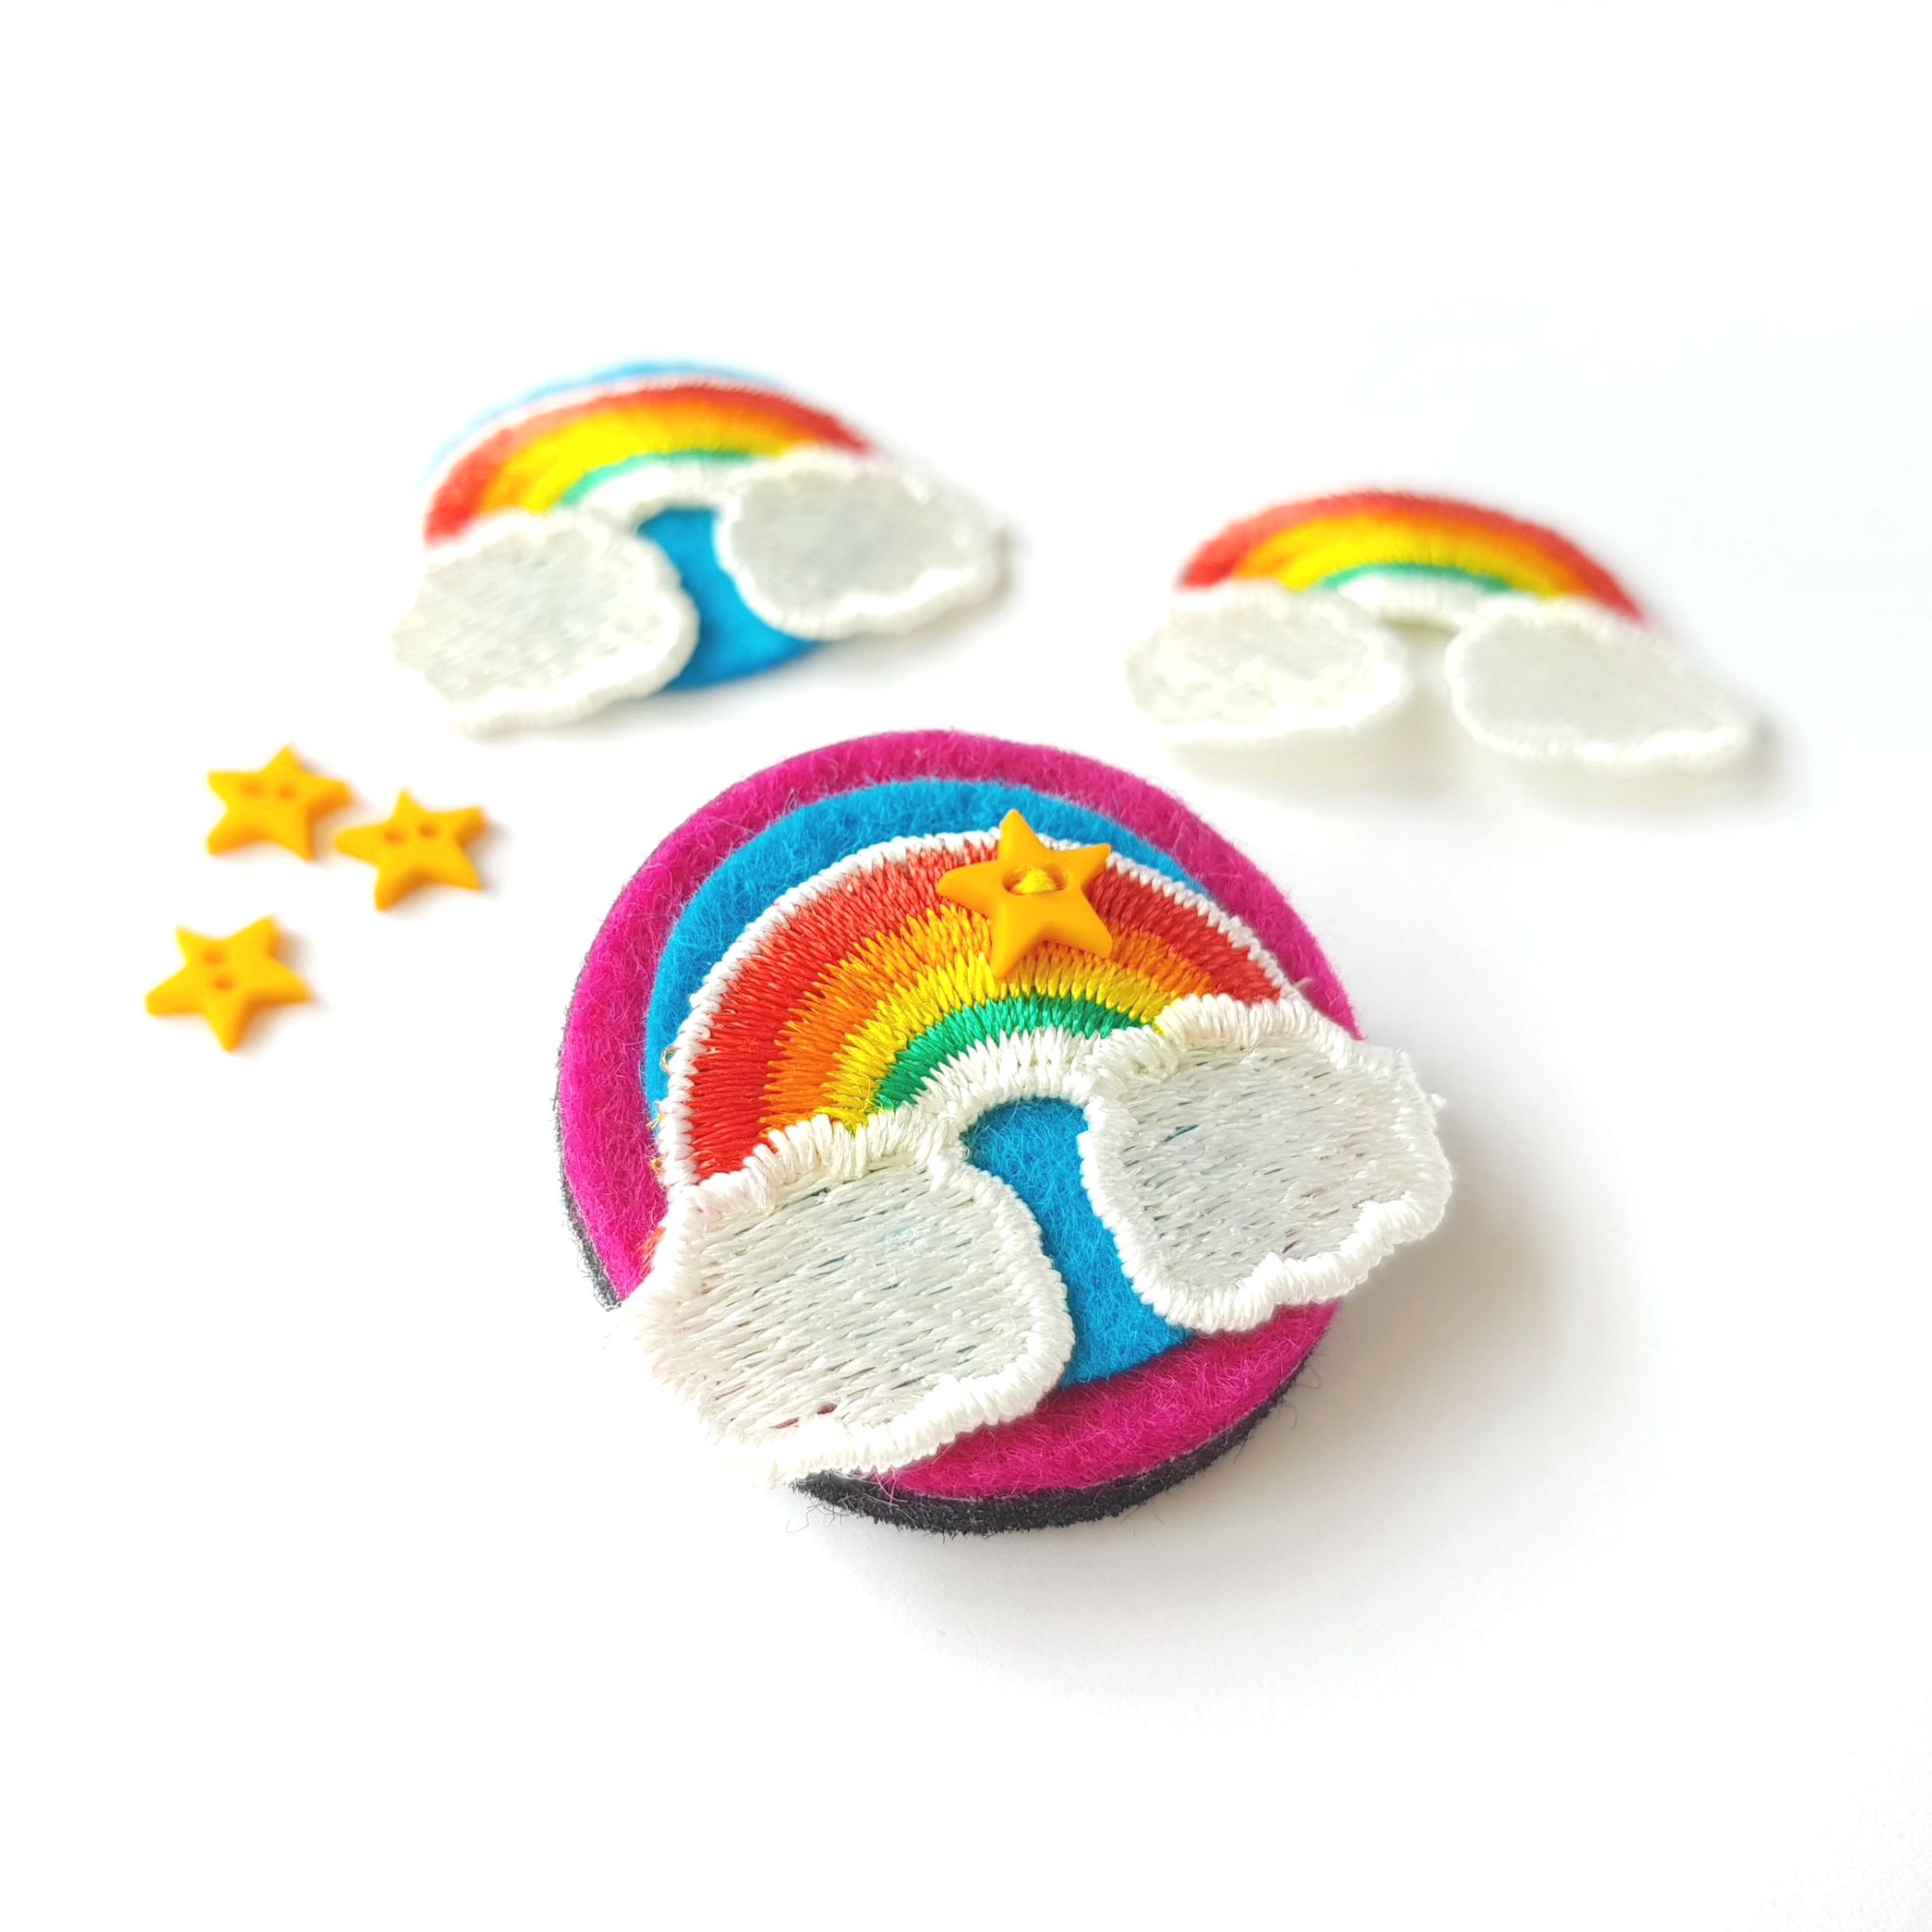 A small, circular, hot pink felt brooch with a stitched rainbow motif and a tiny yellow star shaped button